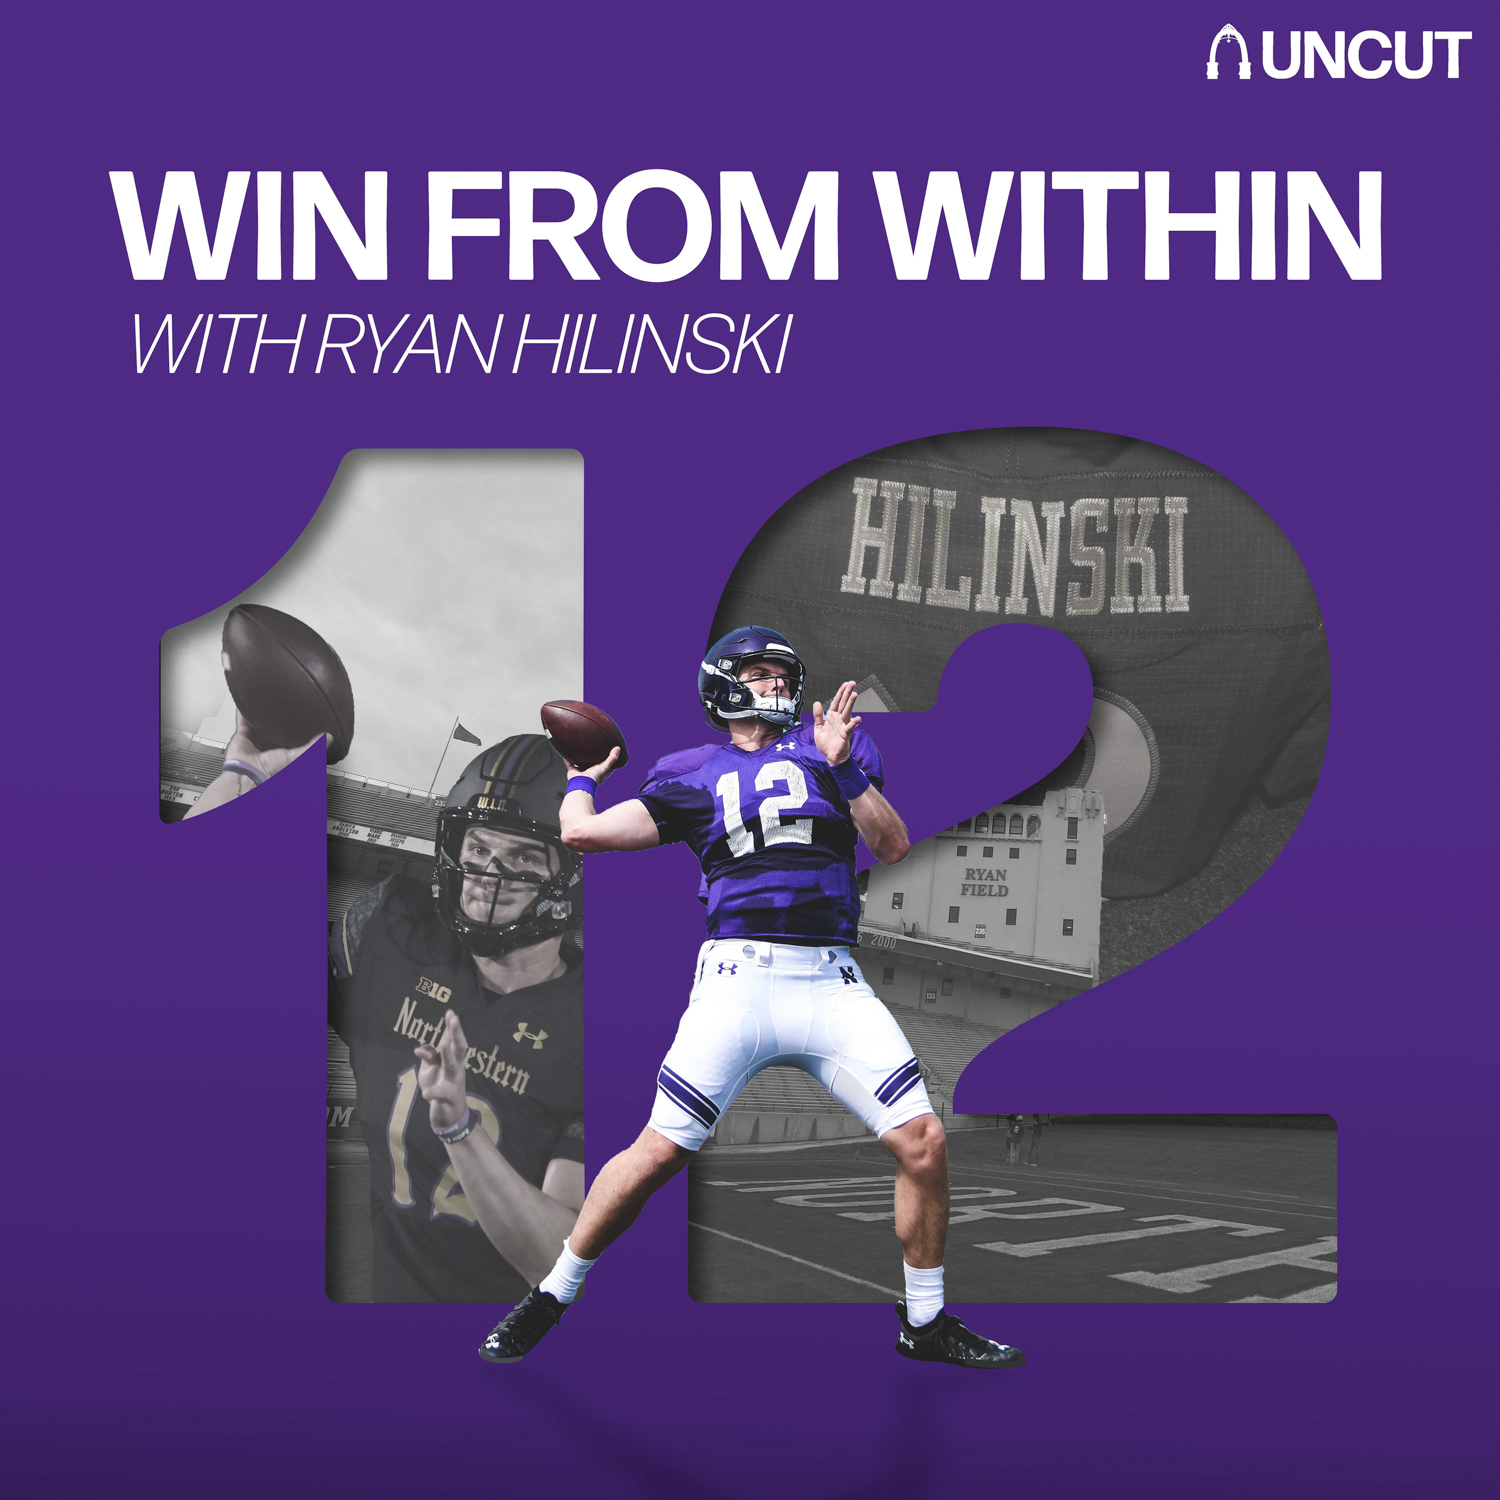 Graphic for the story "Win from Within," written by football player Ryan Hilinski